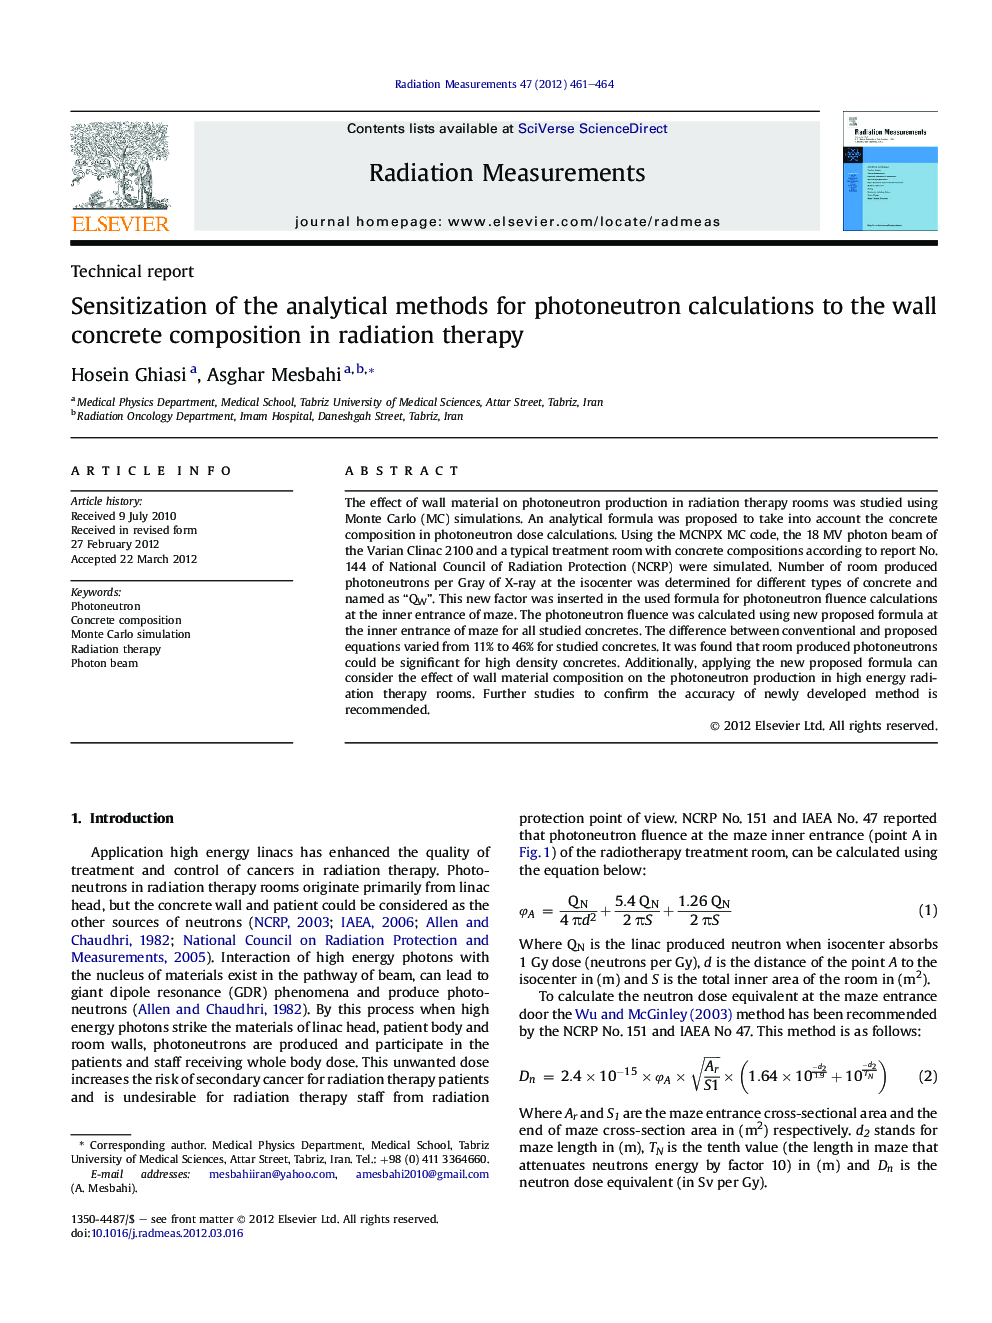 Sensitization of the analytical methods for photoneutron calculations to the wall concrete composition in radiation therapy